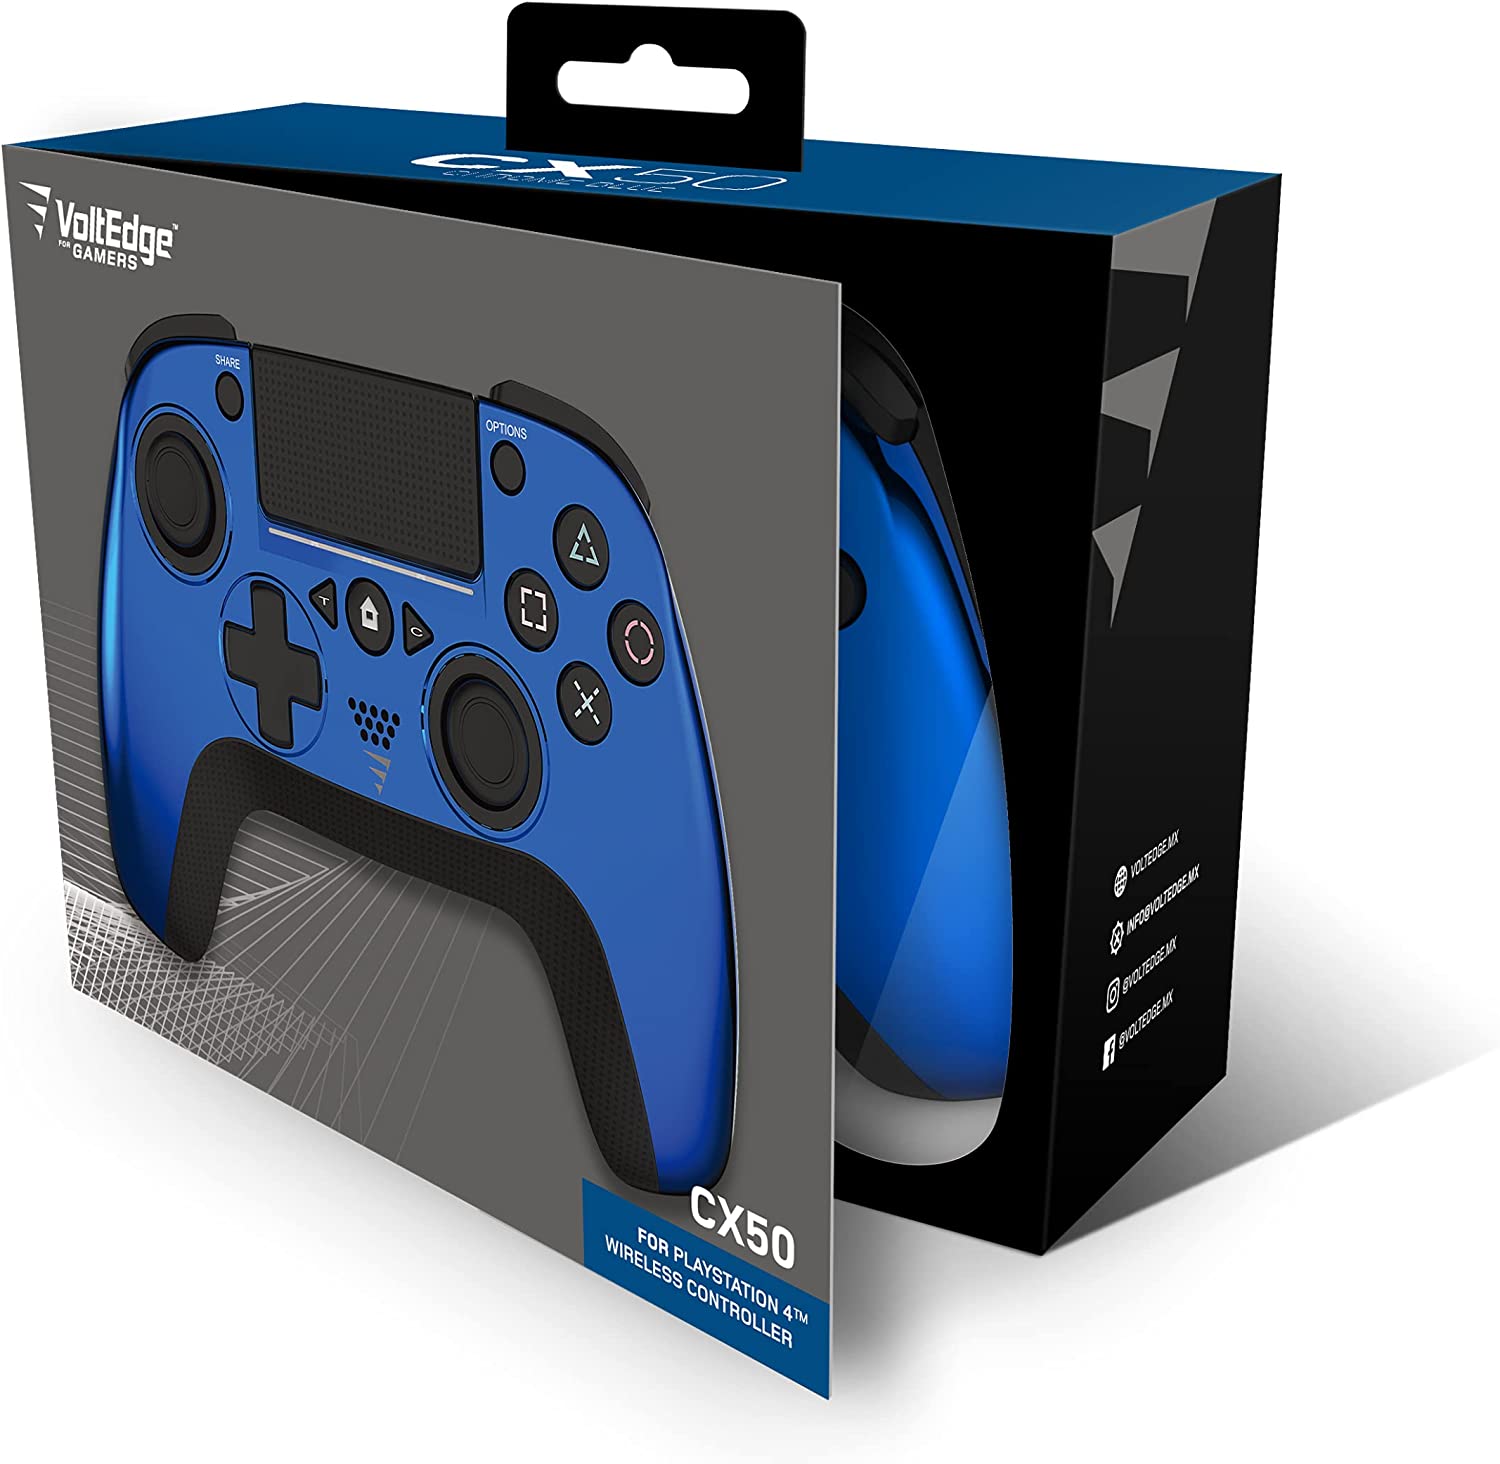 Синяя playstation. ХСОМ PS 4. Golden Warrior Wireless Controller CX-9116. Ps4 Controller vector. Small Size of Blue PLAYSTATION.